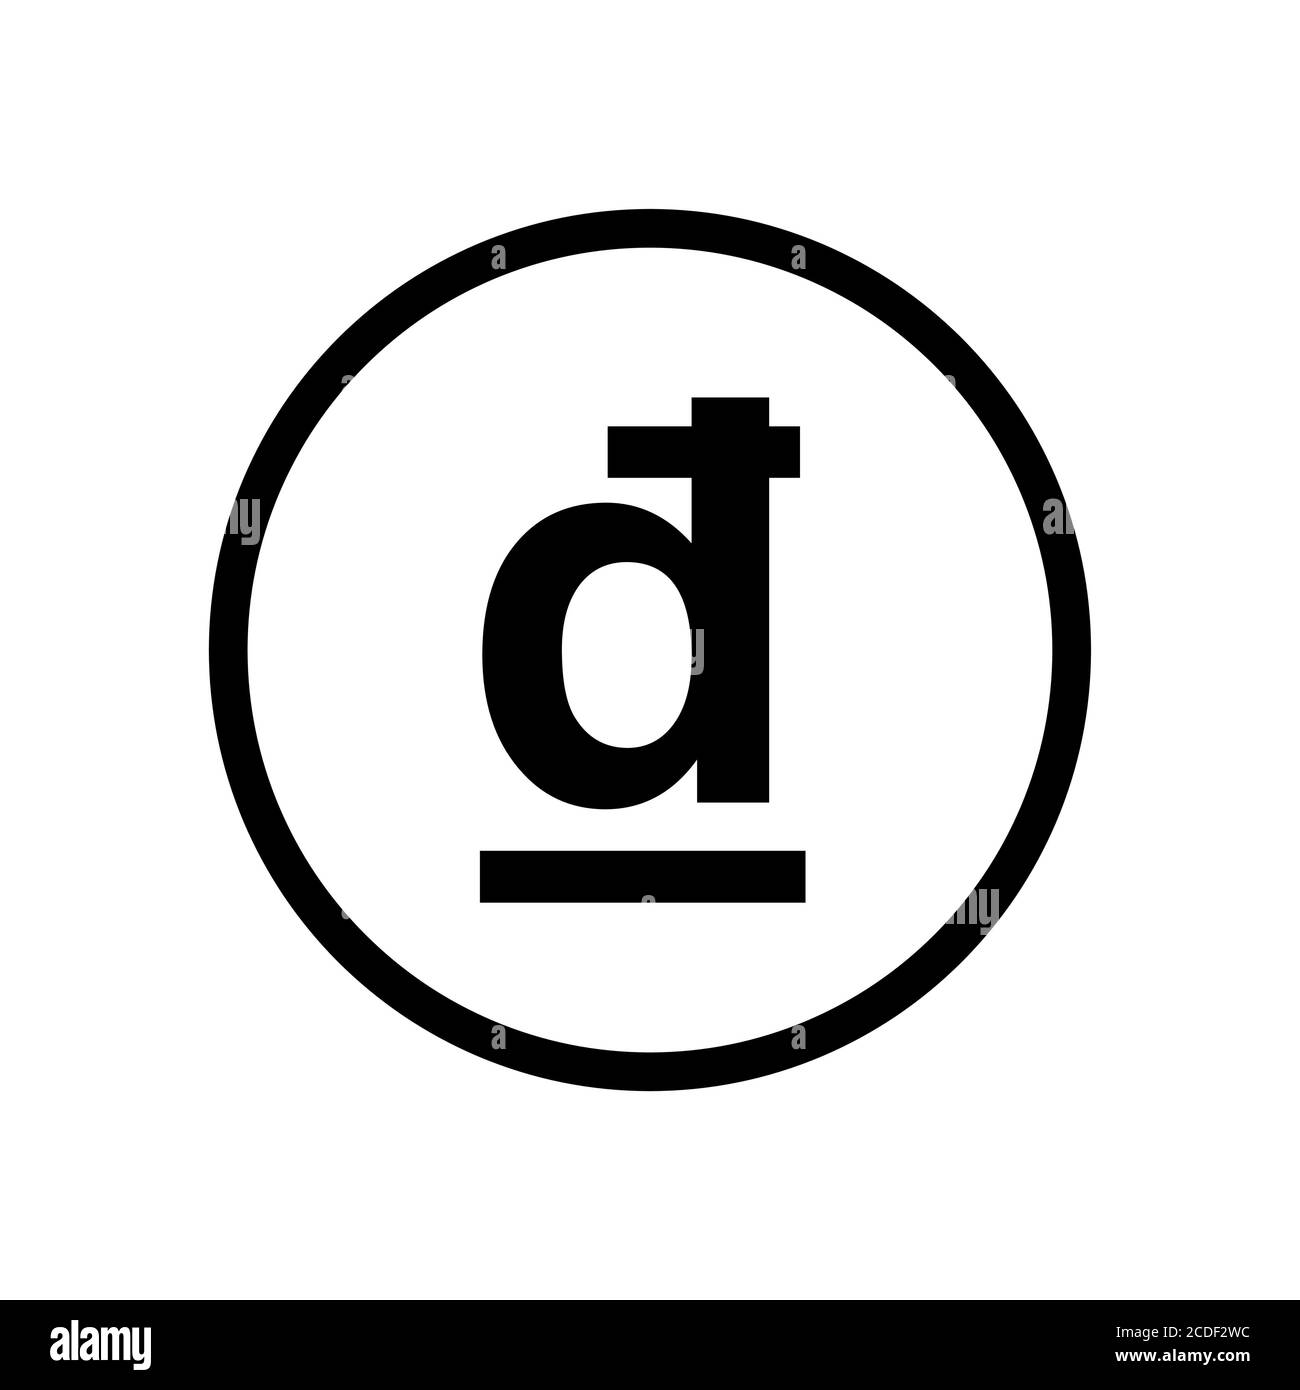 Vietnamese Dong coin monochrome black and white. Current currency symbol. Stock Vector